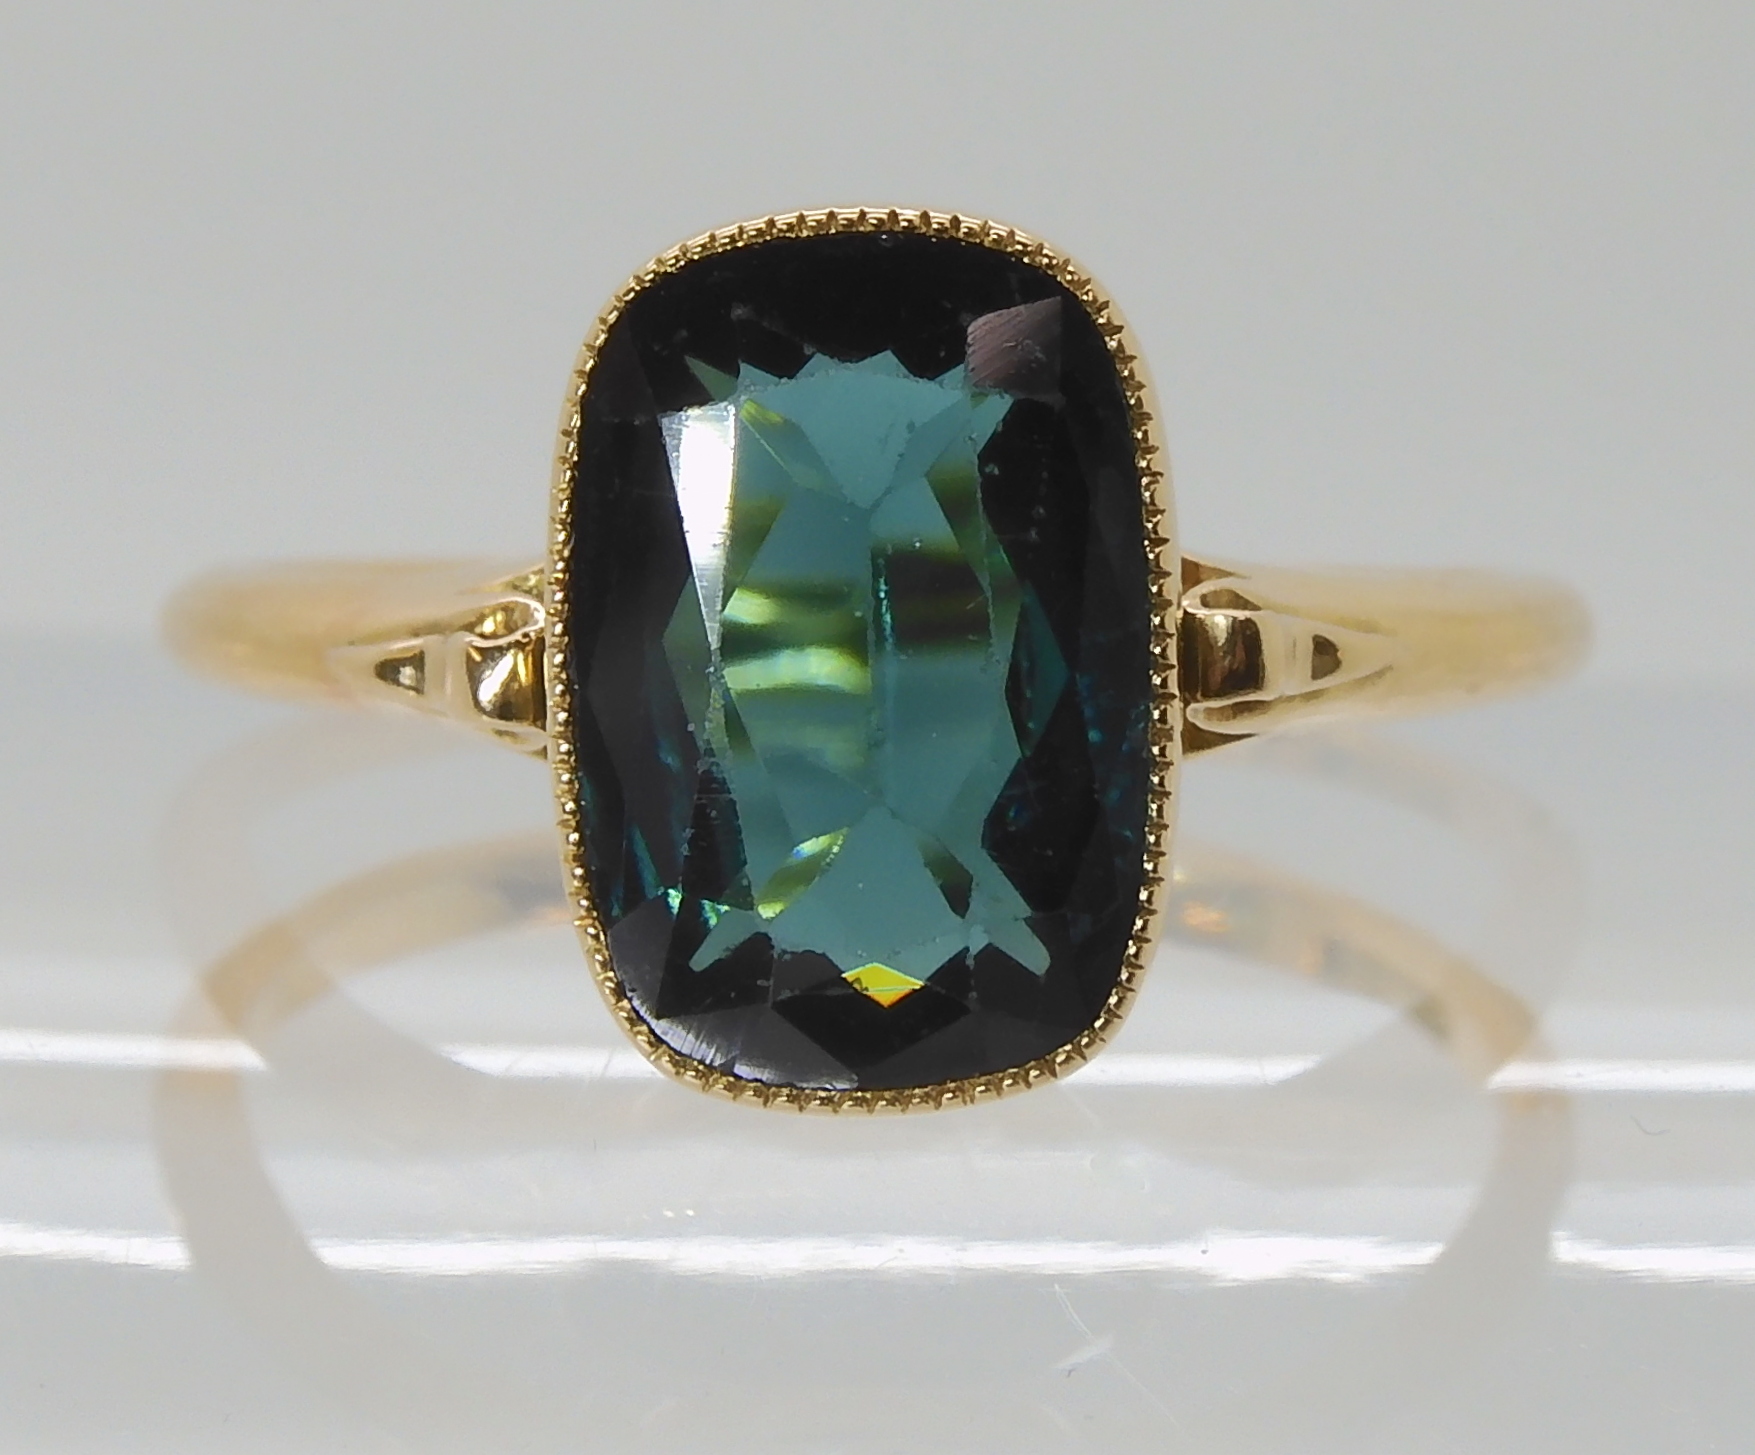 A TEAL COLOURED TOURMALINE RING mounted in bright yellow metal, with decorative scroll shoulders,